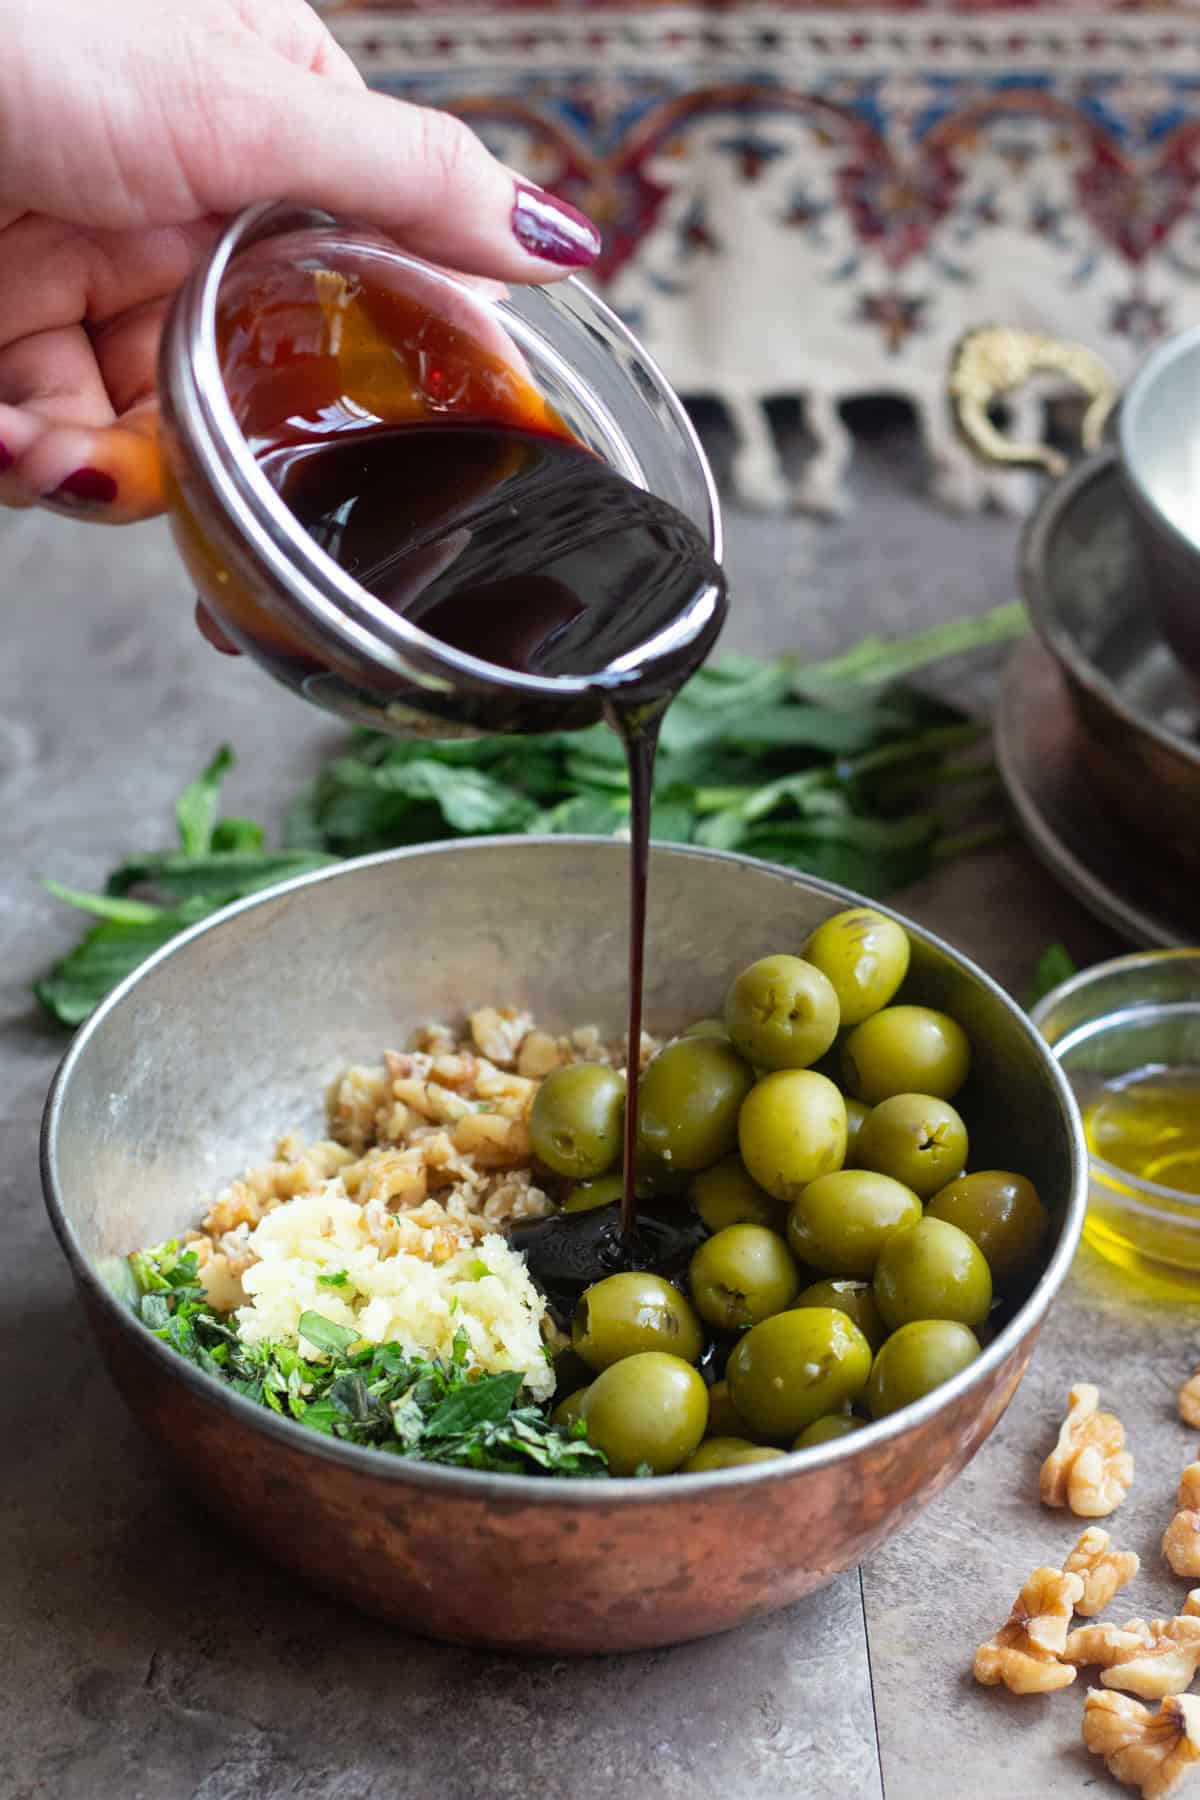 To make these marinated olives, mix all the ingredients, pour pomegranate molasses into the bowl and mix well.